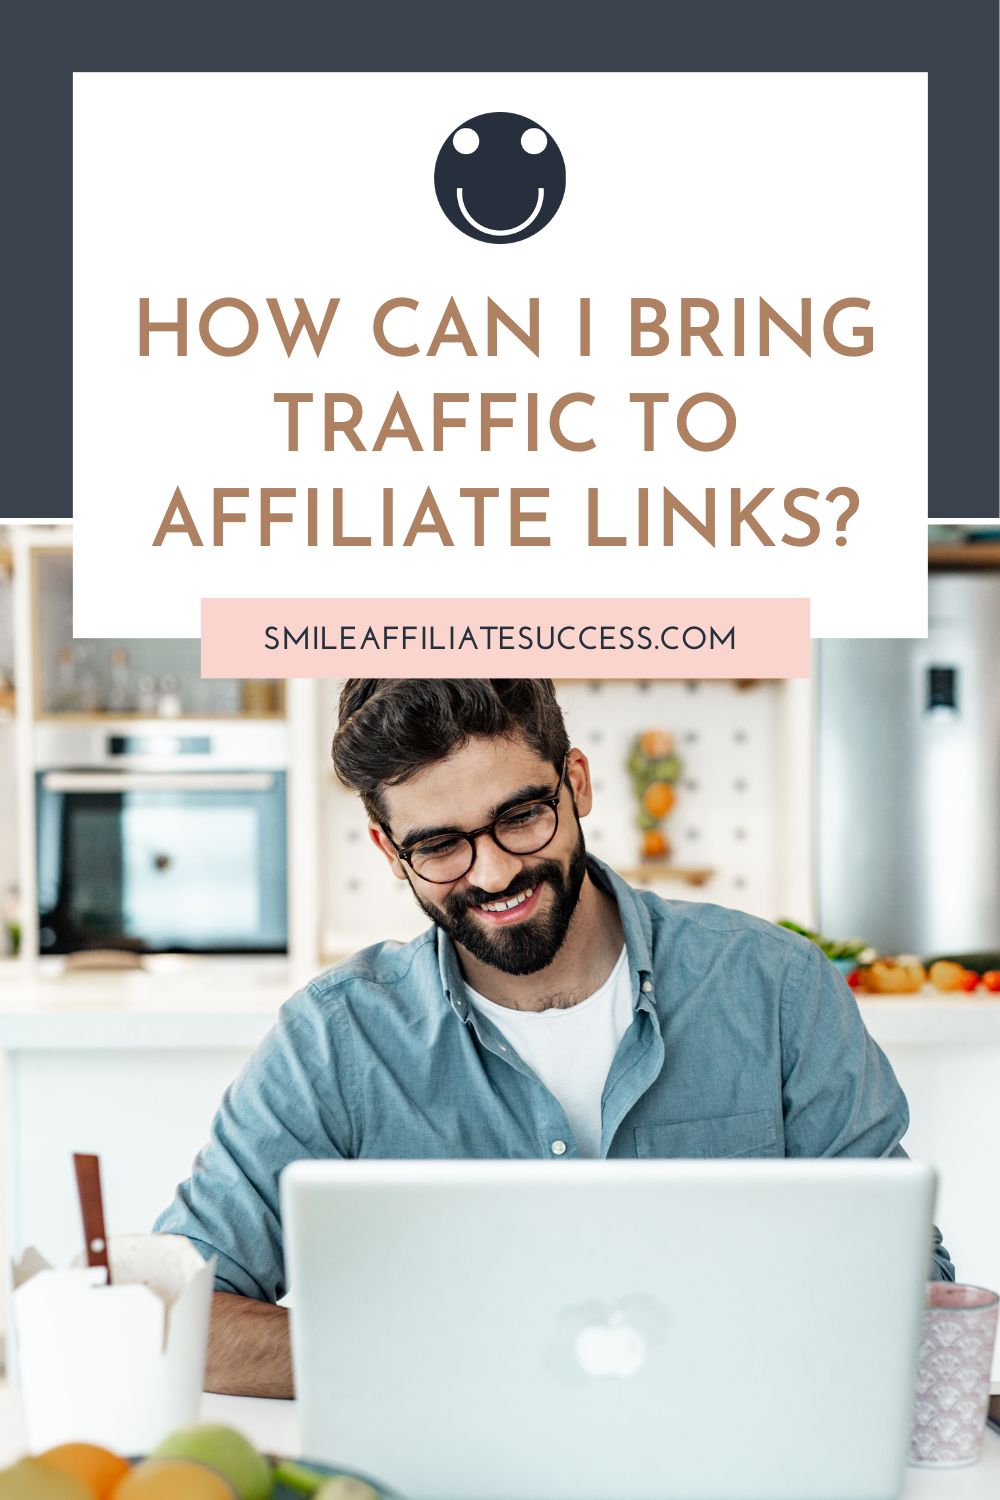 How Can I Bring Traffic To Affiliate Links?